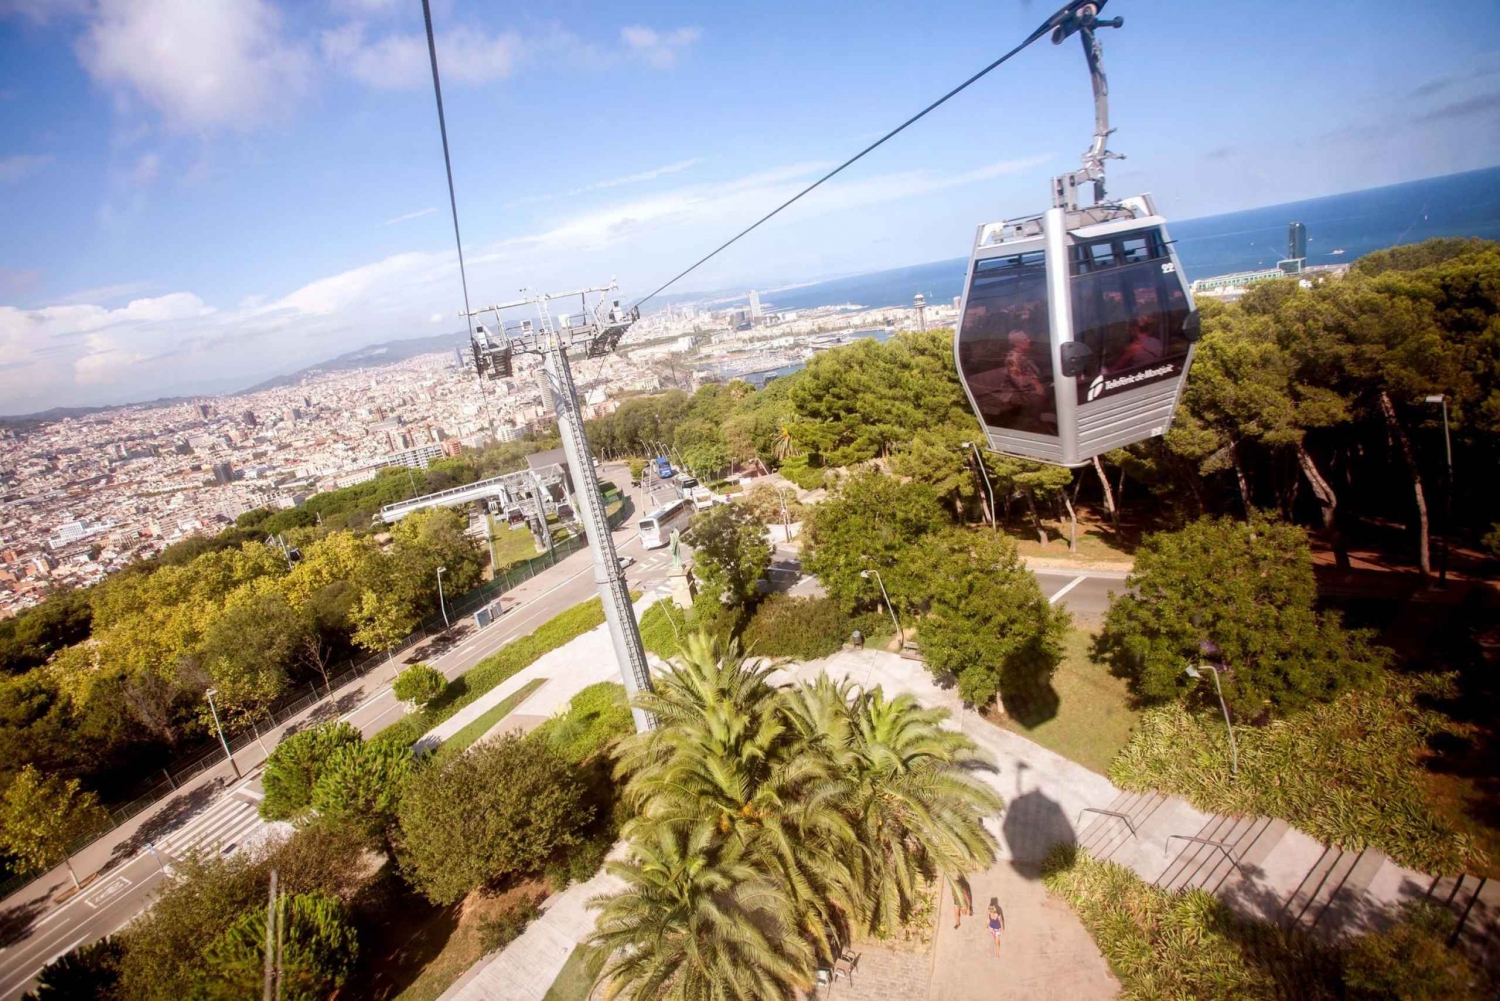 Take-a-Festive-Cable-Car-Ride-to-Montjuic